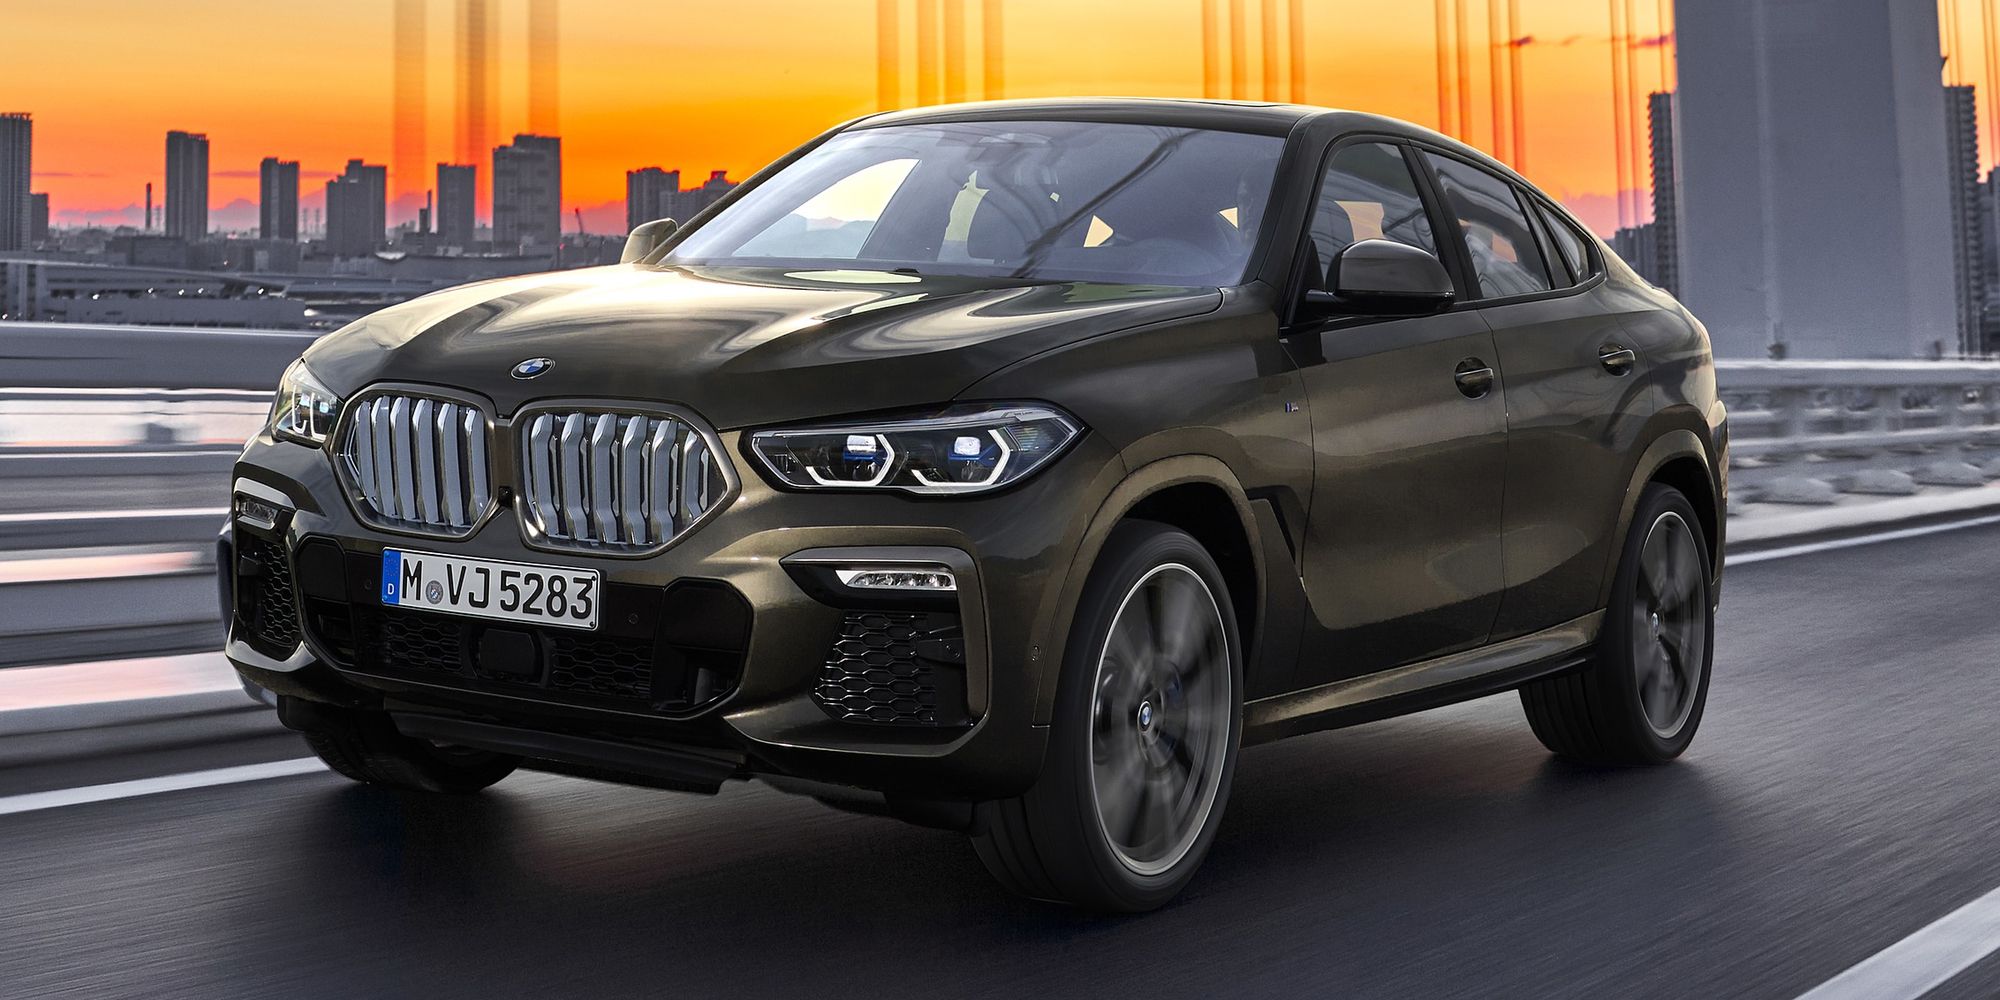 The front of the BMW X6